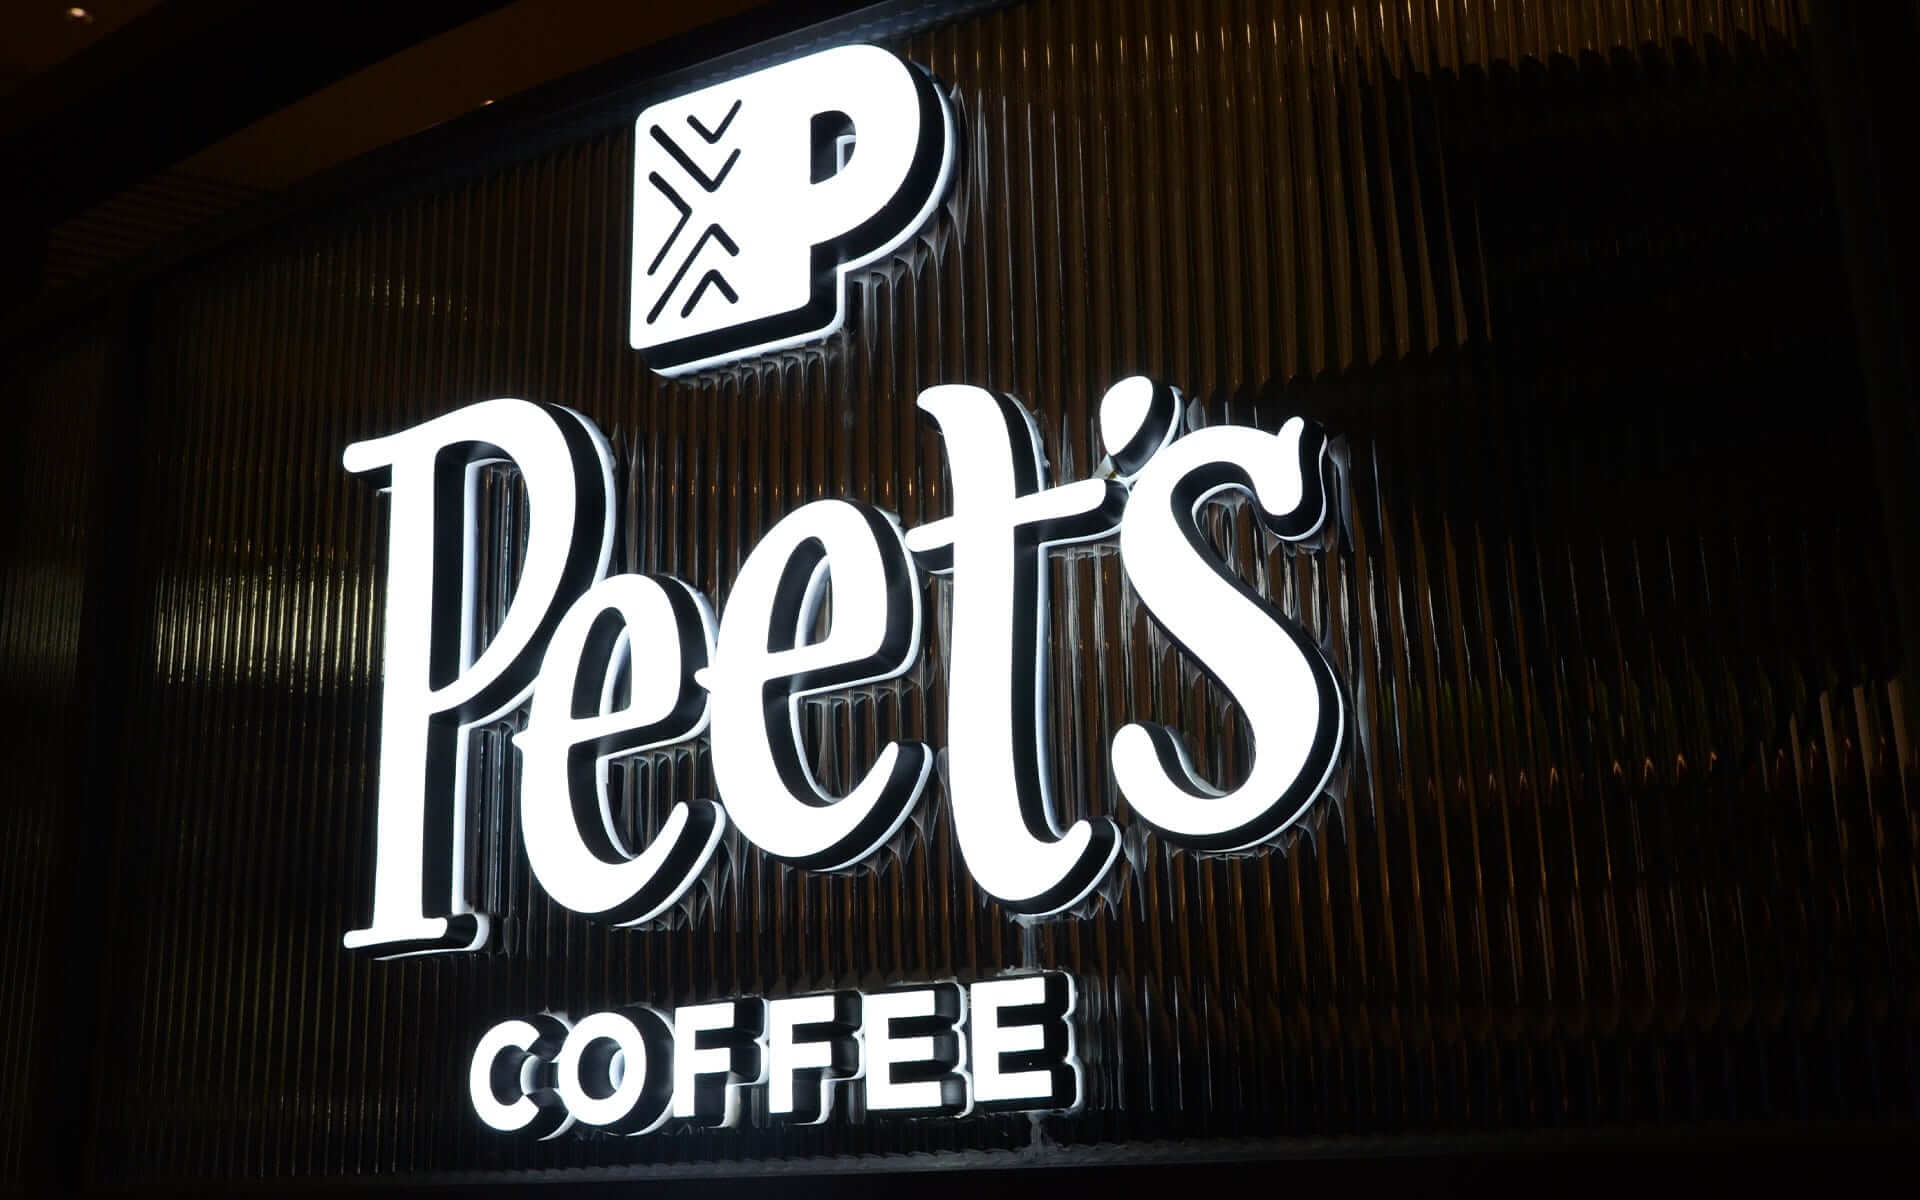 Face and Back-lit Acrylic Channel Letters for Peet's Coffee